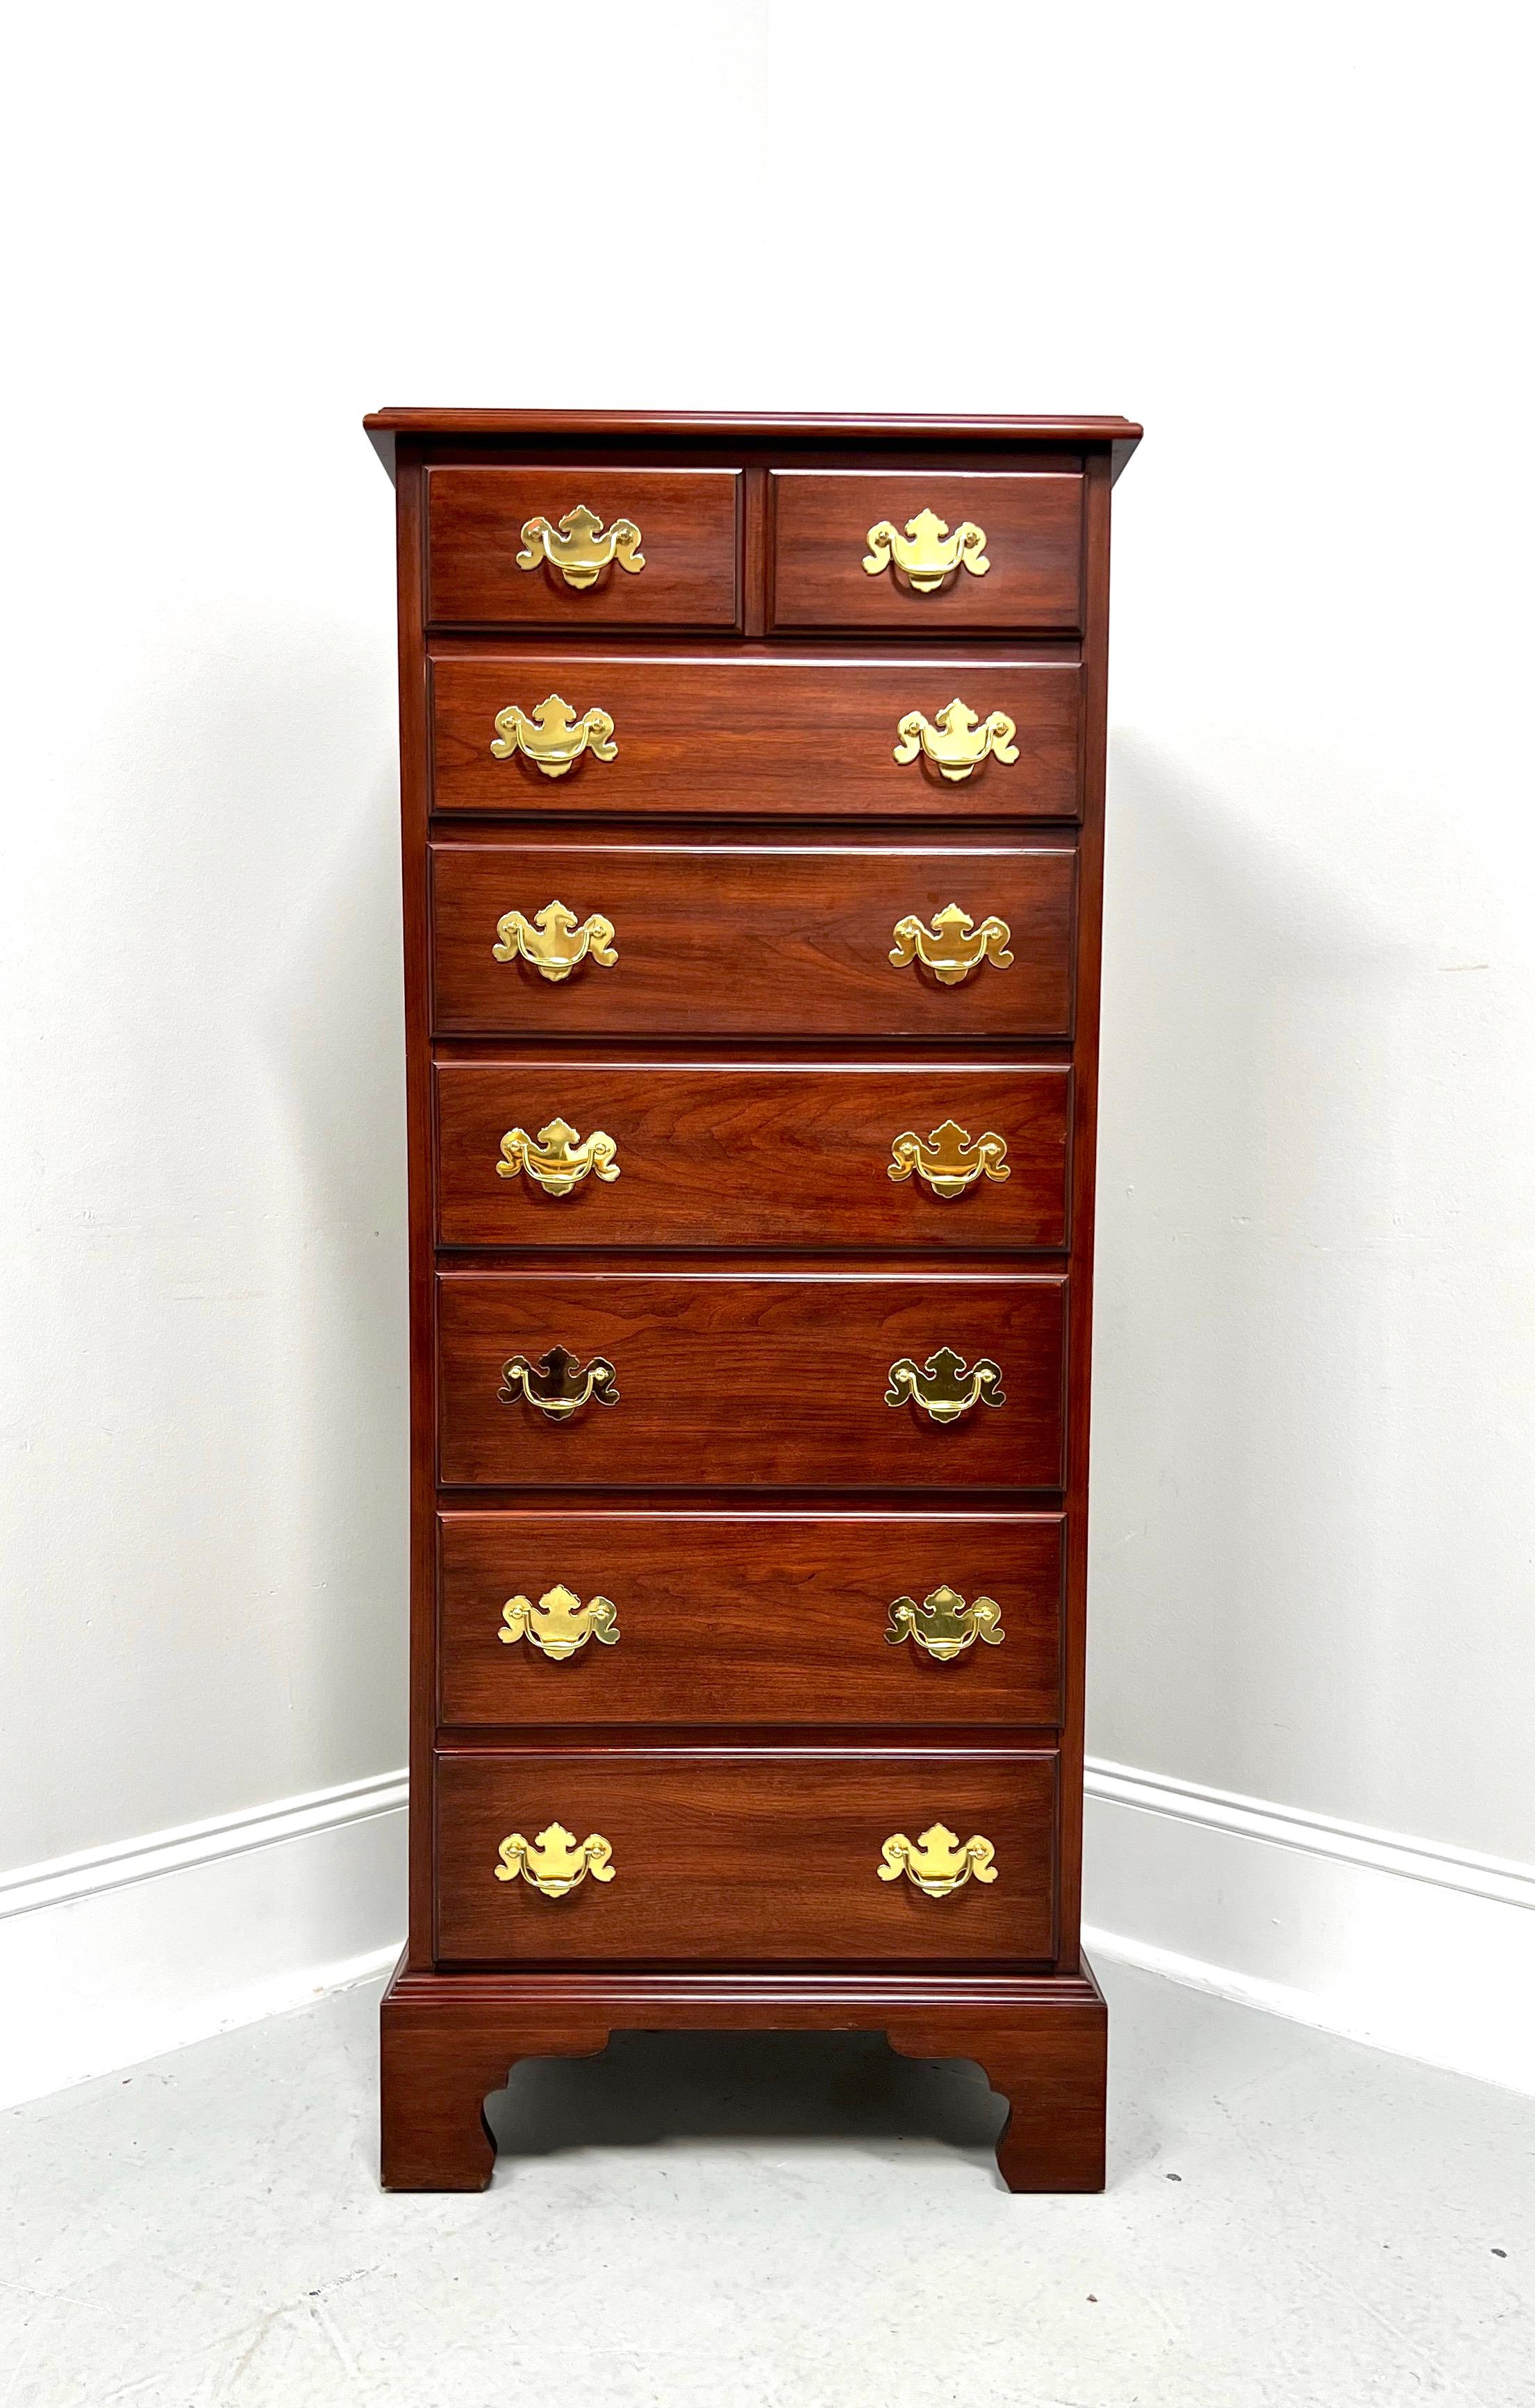 A semainier lingerie chest in the Chippendale style by Henkel Harris, of Winchester, Virginia, USA. Solid wild black cherry wood with brass hardware, bevel edge to top, and bracket feet. Features seven drawers of dovetail construction, with top